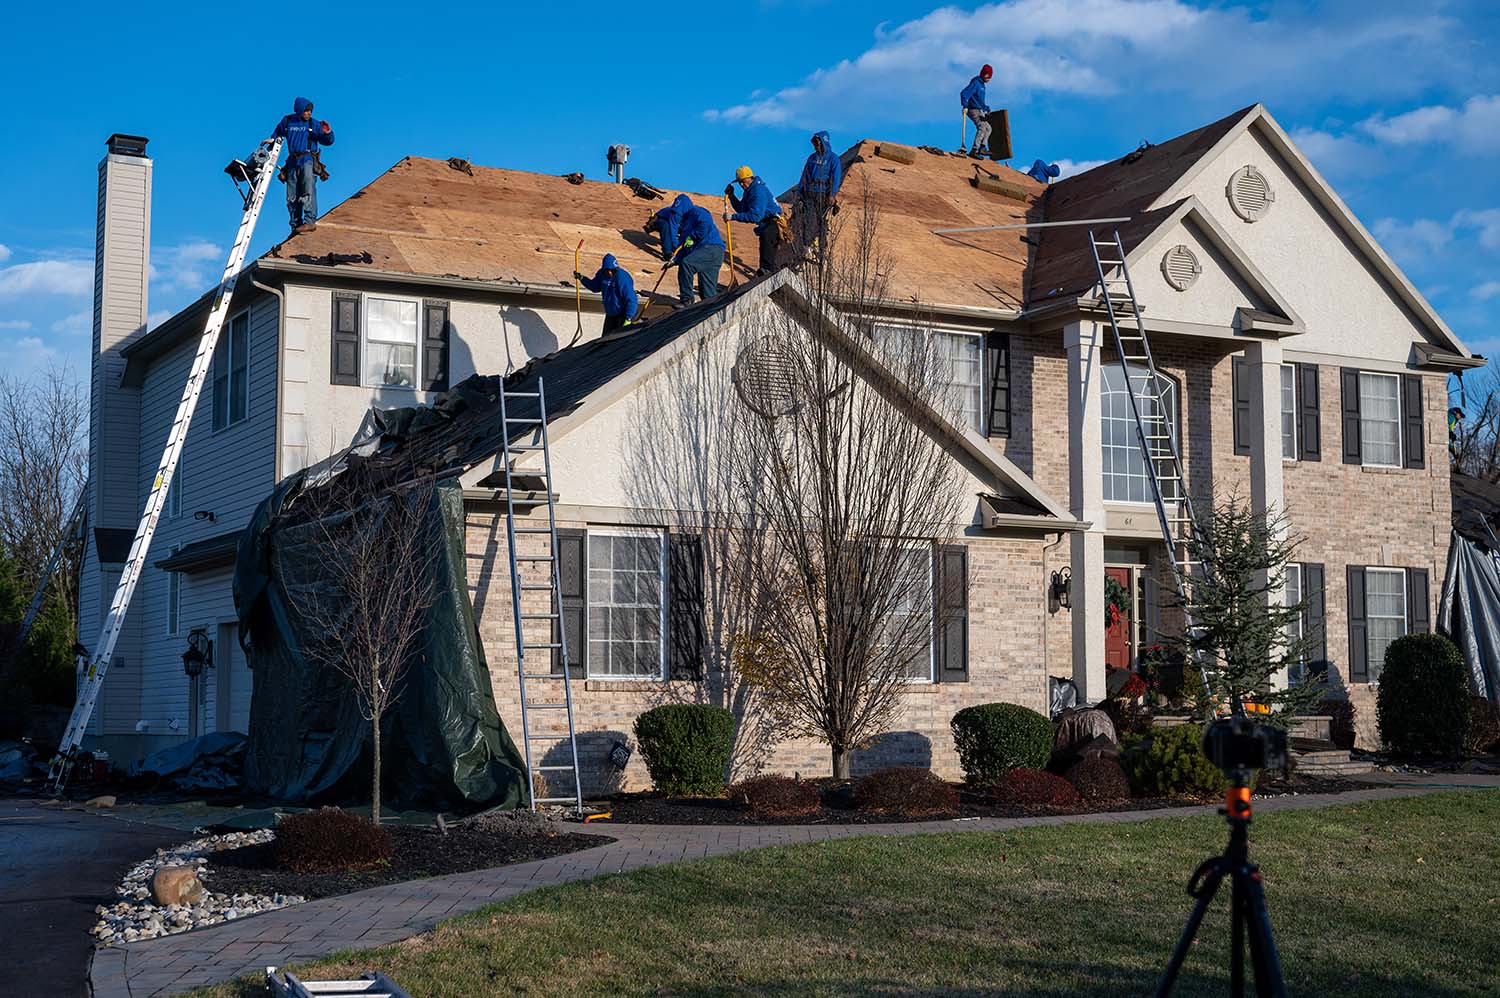 Roofing repair company - residential roofing contractors in Marlton (medium image)